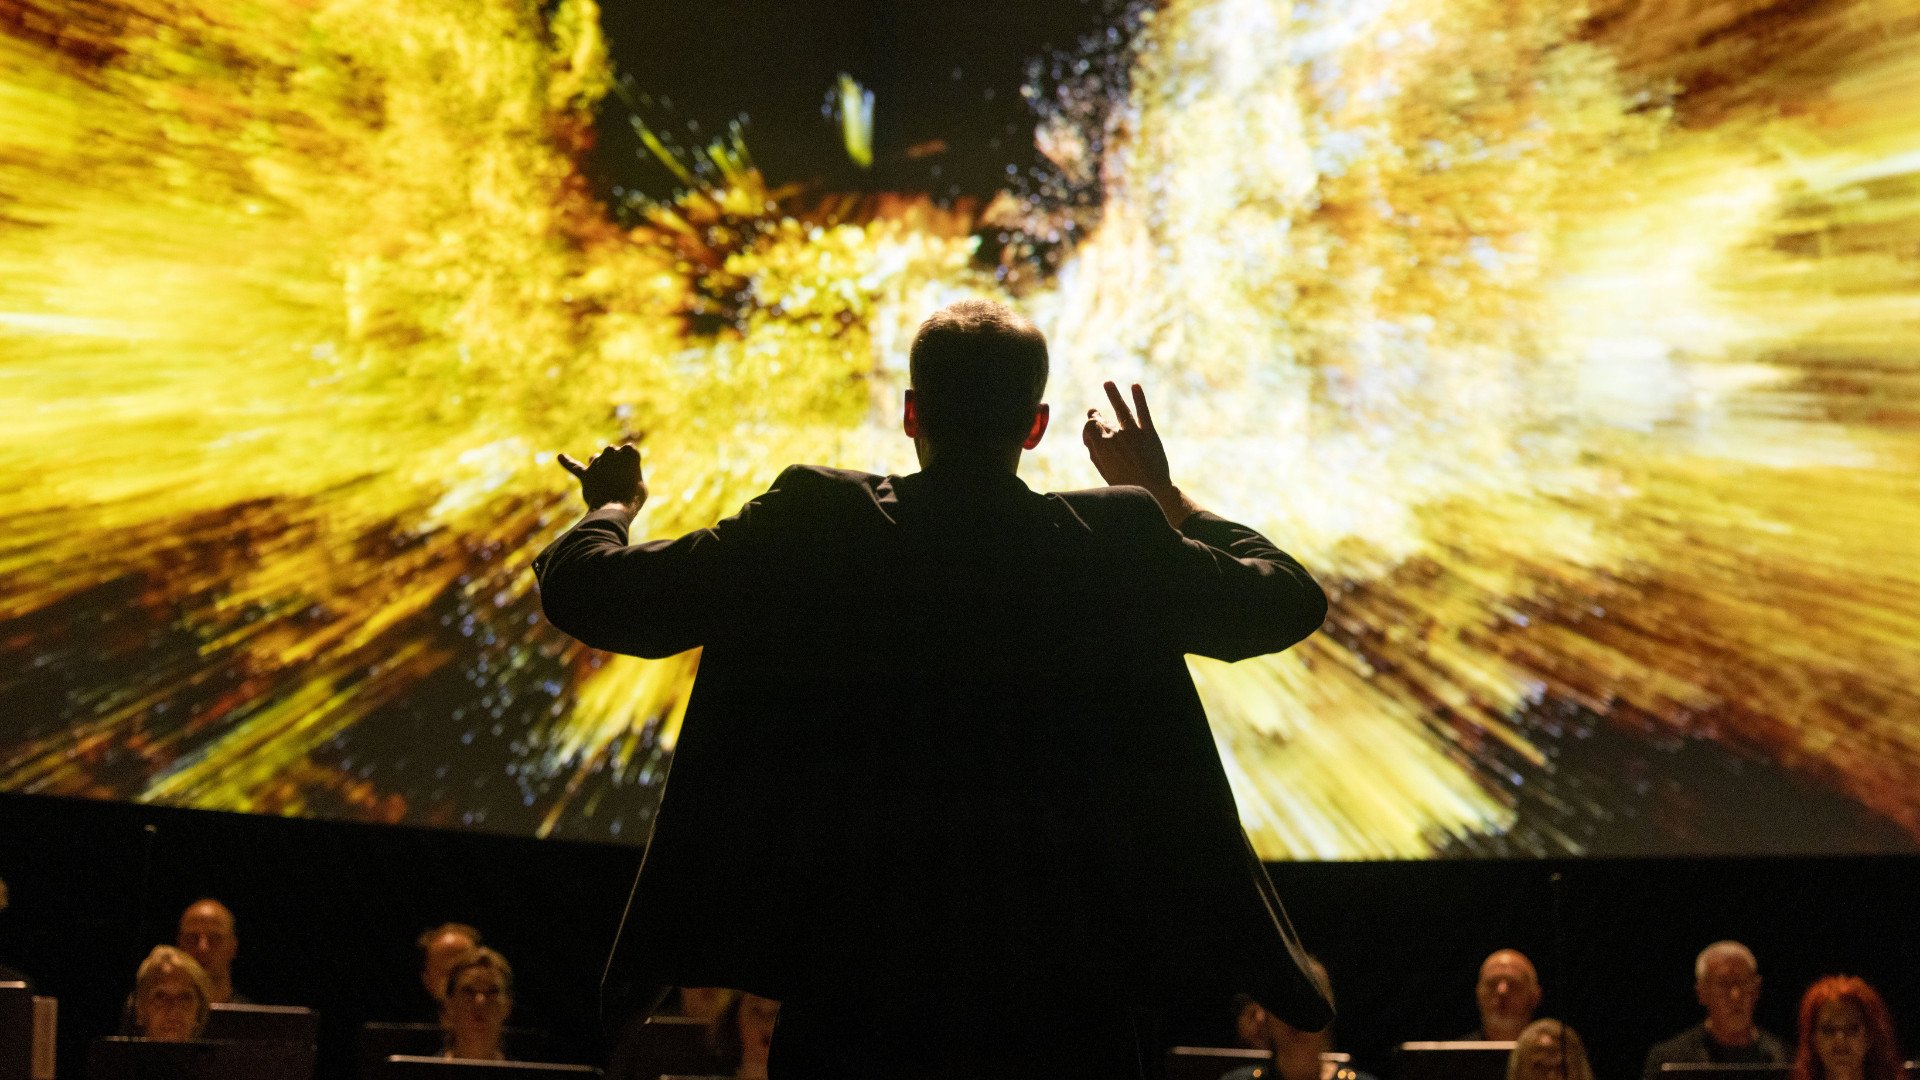 The Netherlands Chamber Choir performs Van Gogh in Me during the 2024 Hong Kong Arts Festival. The concerts featured immersive digital projections of paintings by Van Gogh and Klimt set to music based on works by composers including Debussy, Gustav and Alma Mahler, and Saint-Saëns. Photo: Courtesy of HKAF